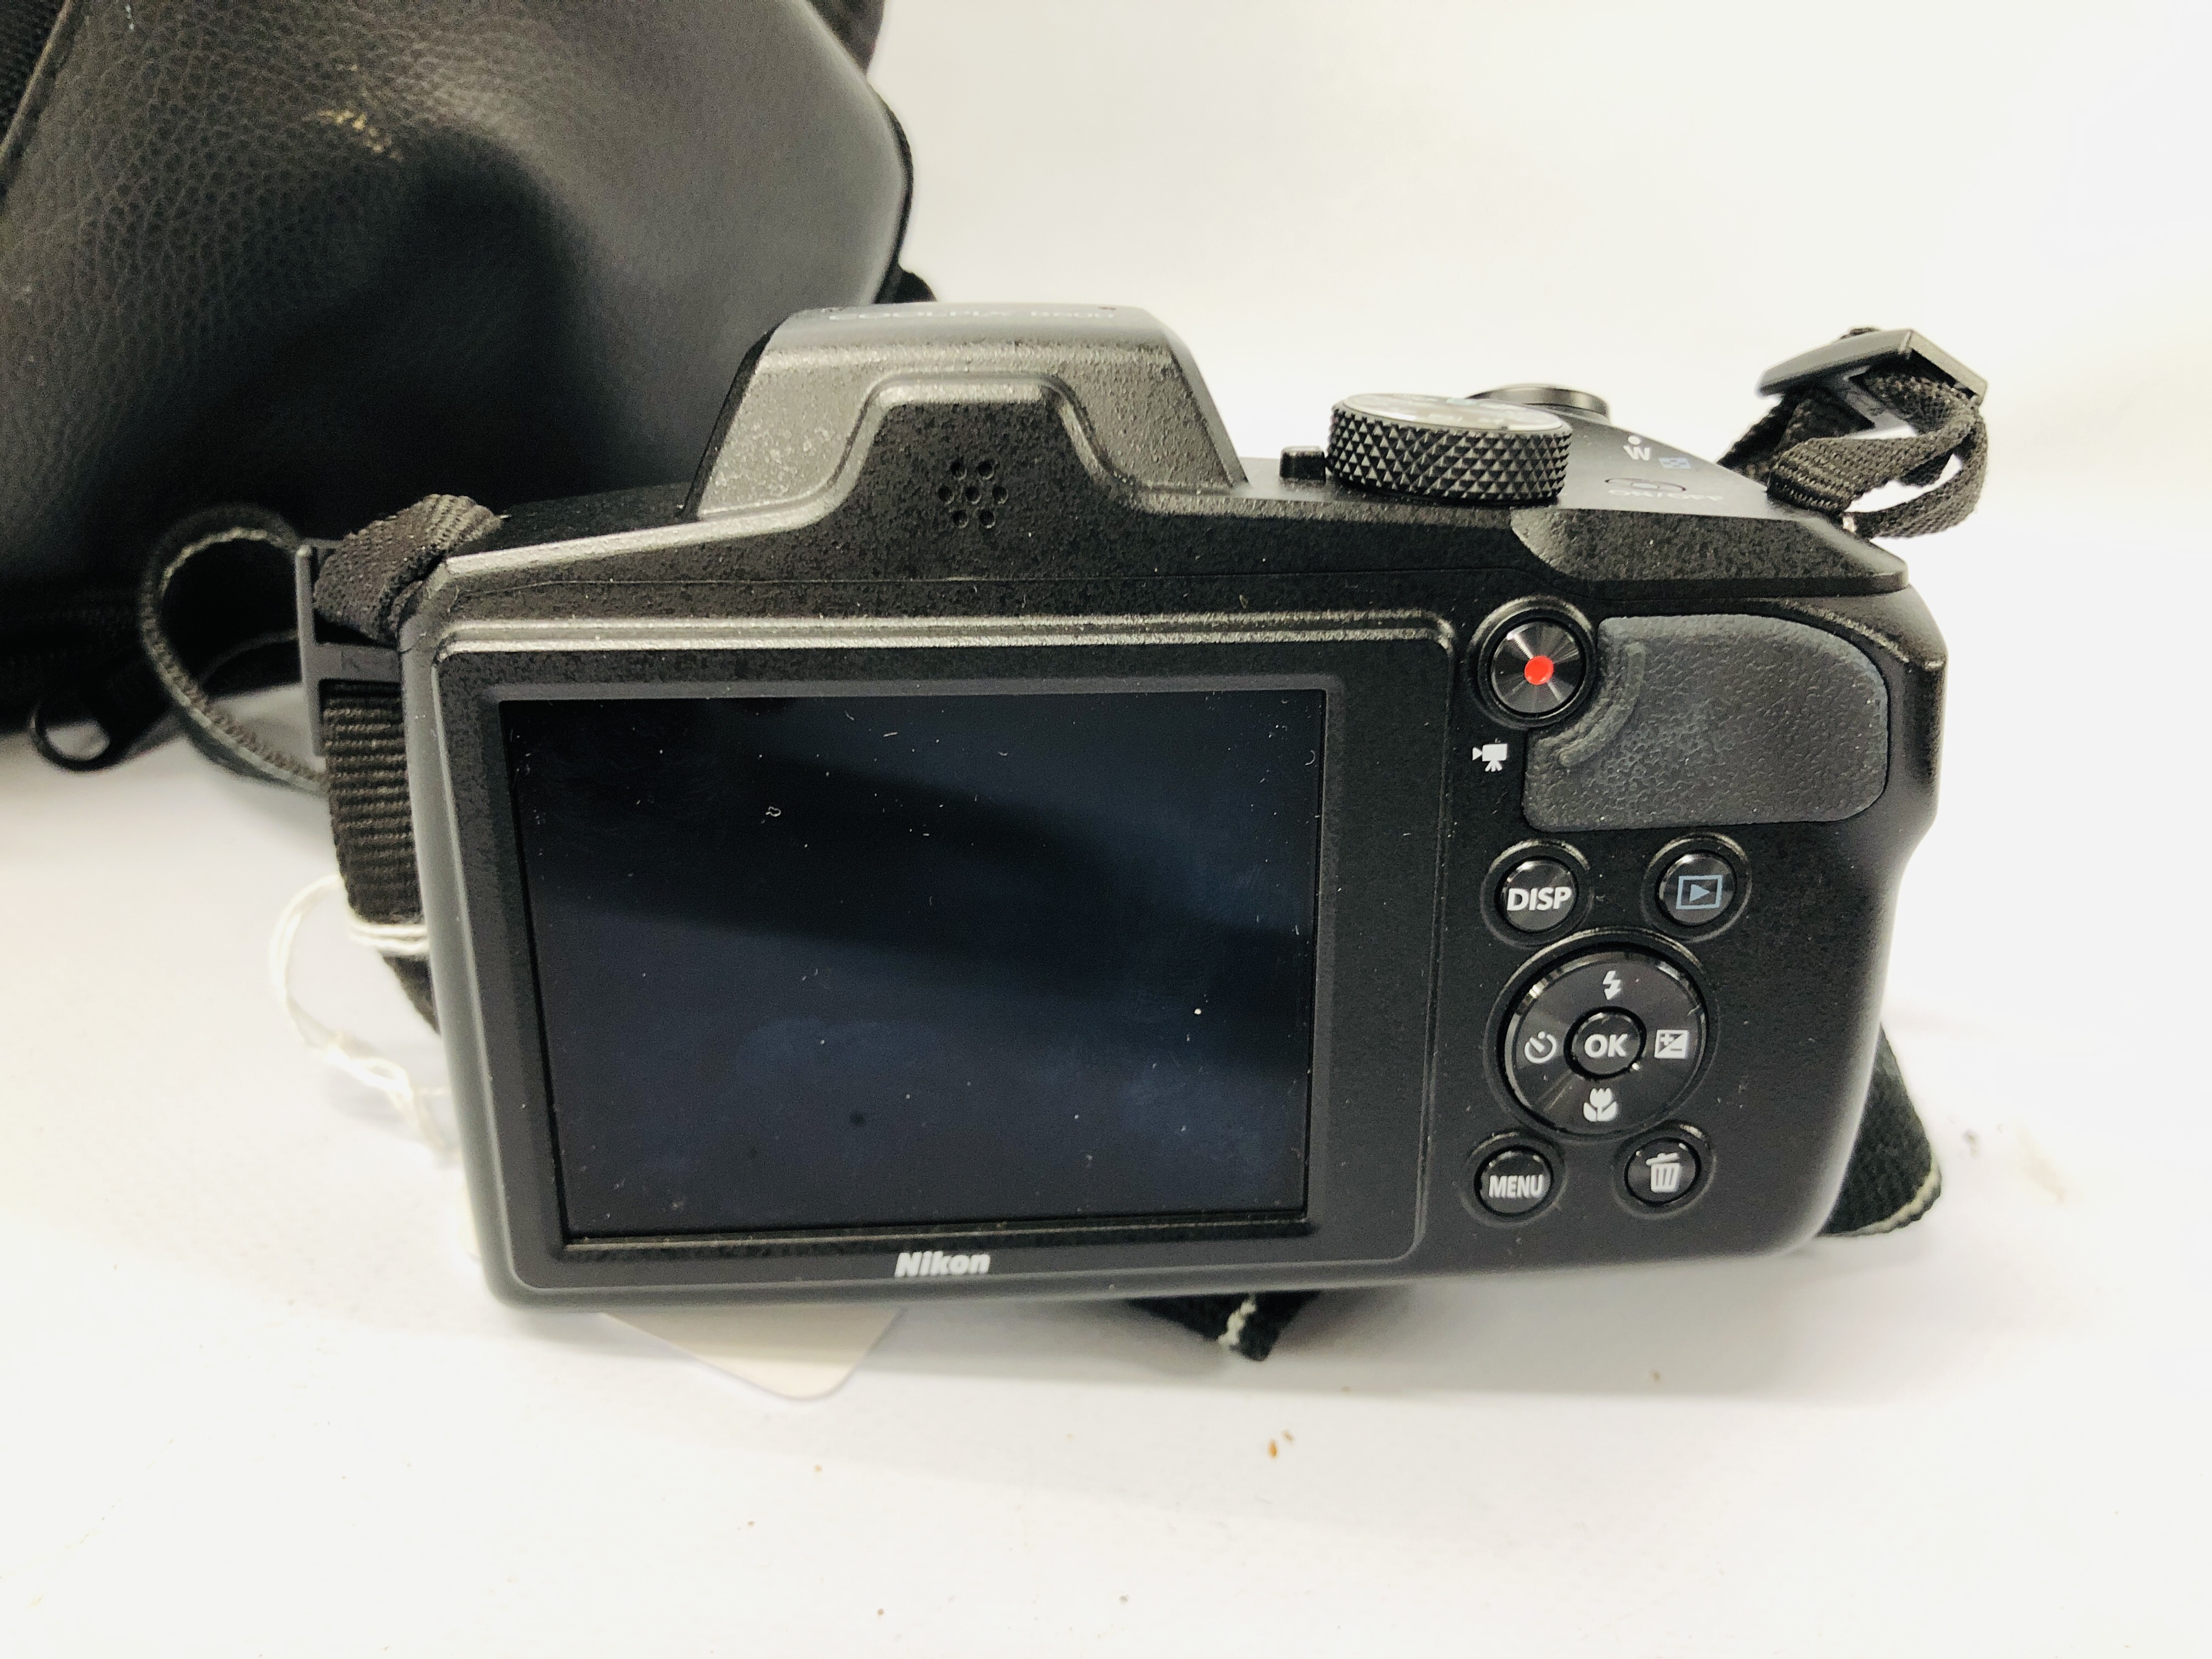 NIKON COOLPIX B600 DIGITAL CAMERA WITH CAMERA BAG AND CHARGER S/N 74001233 - SOLD AS SEEN. - Image 4 of 5